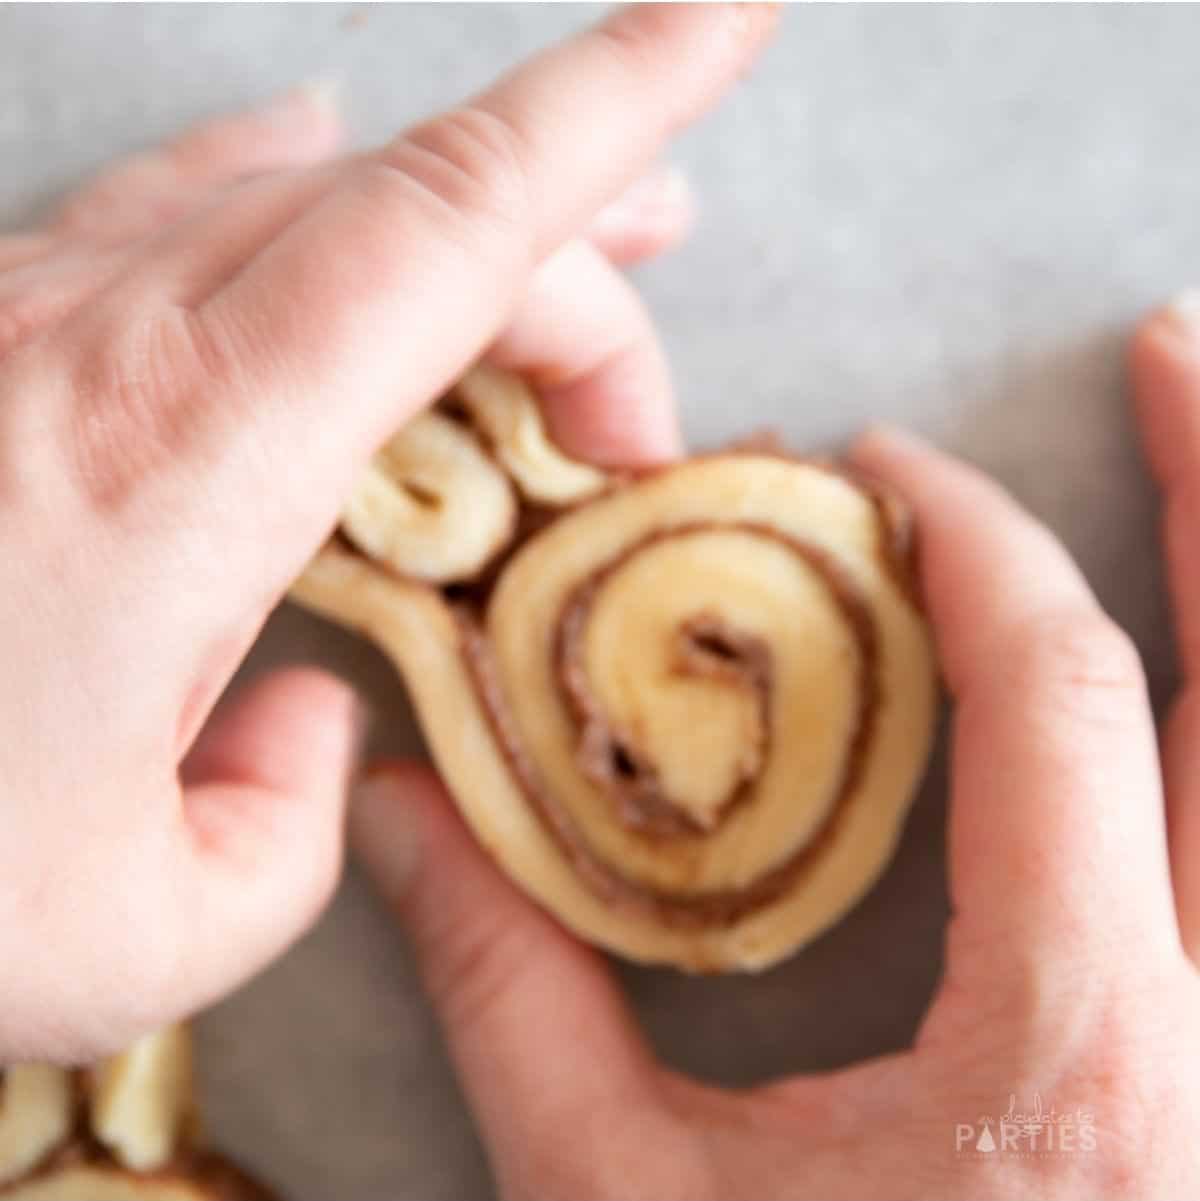 Shaping a cinnamon roll into a bunny.